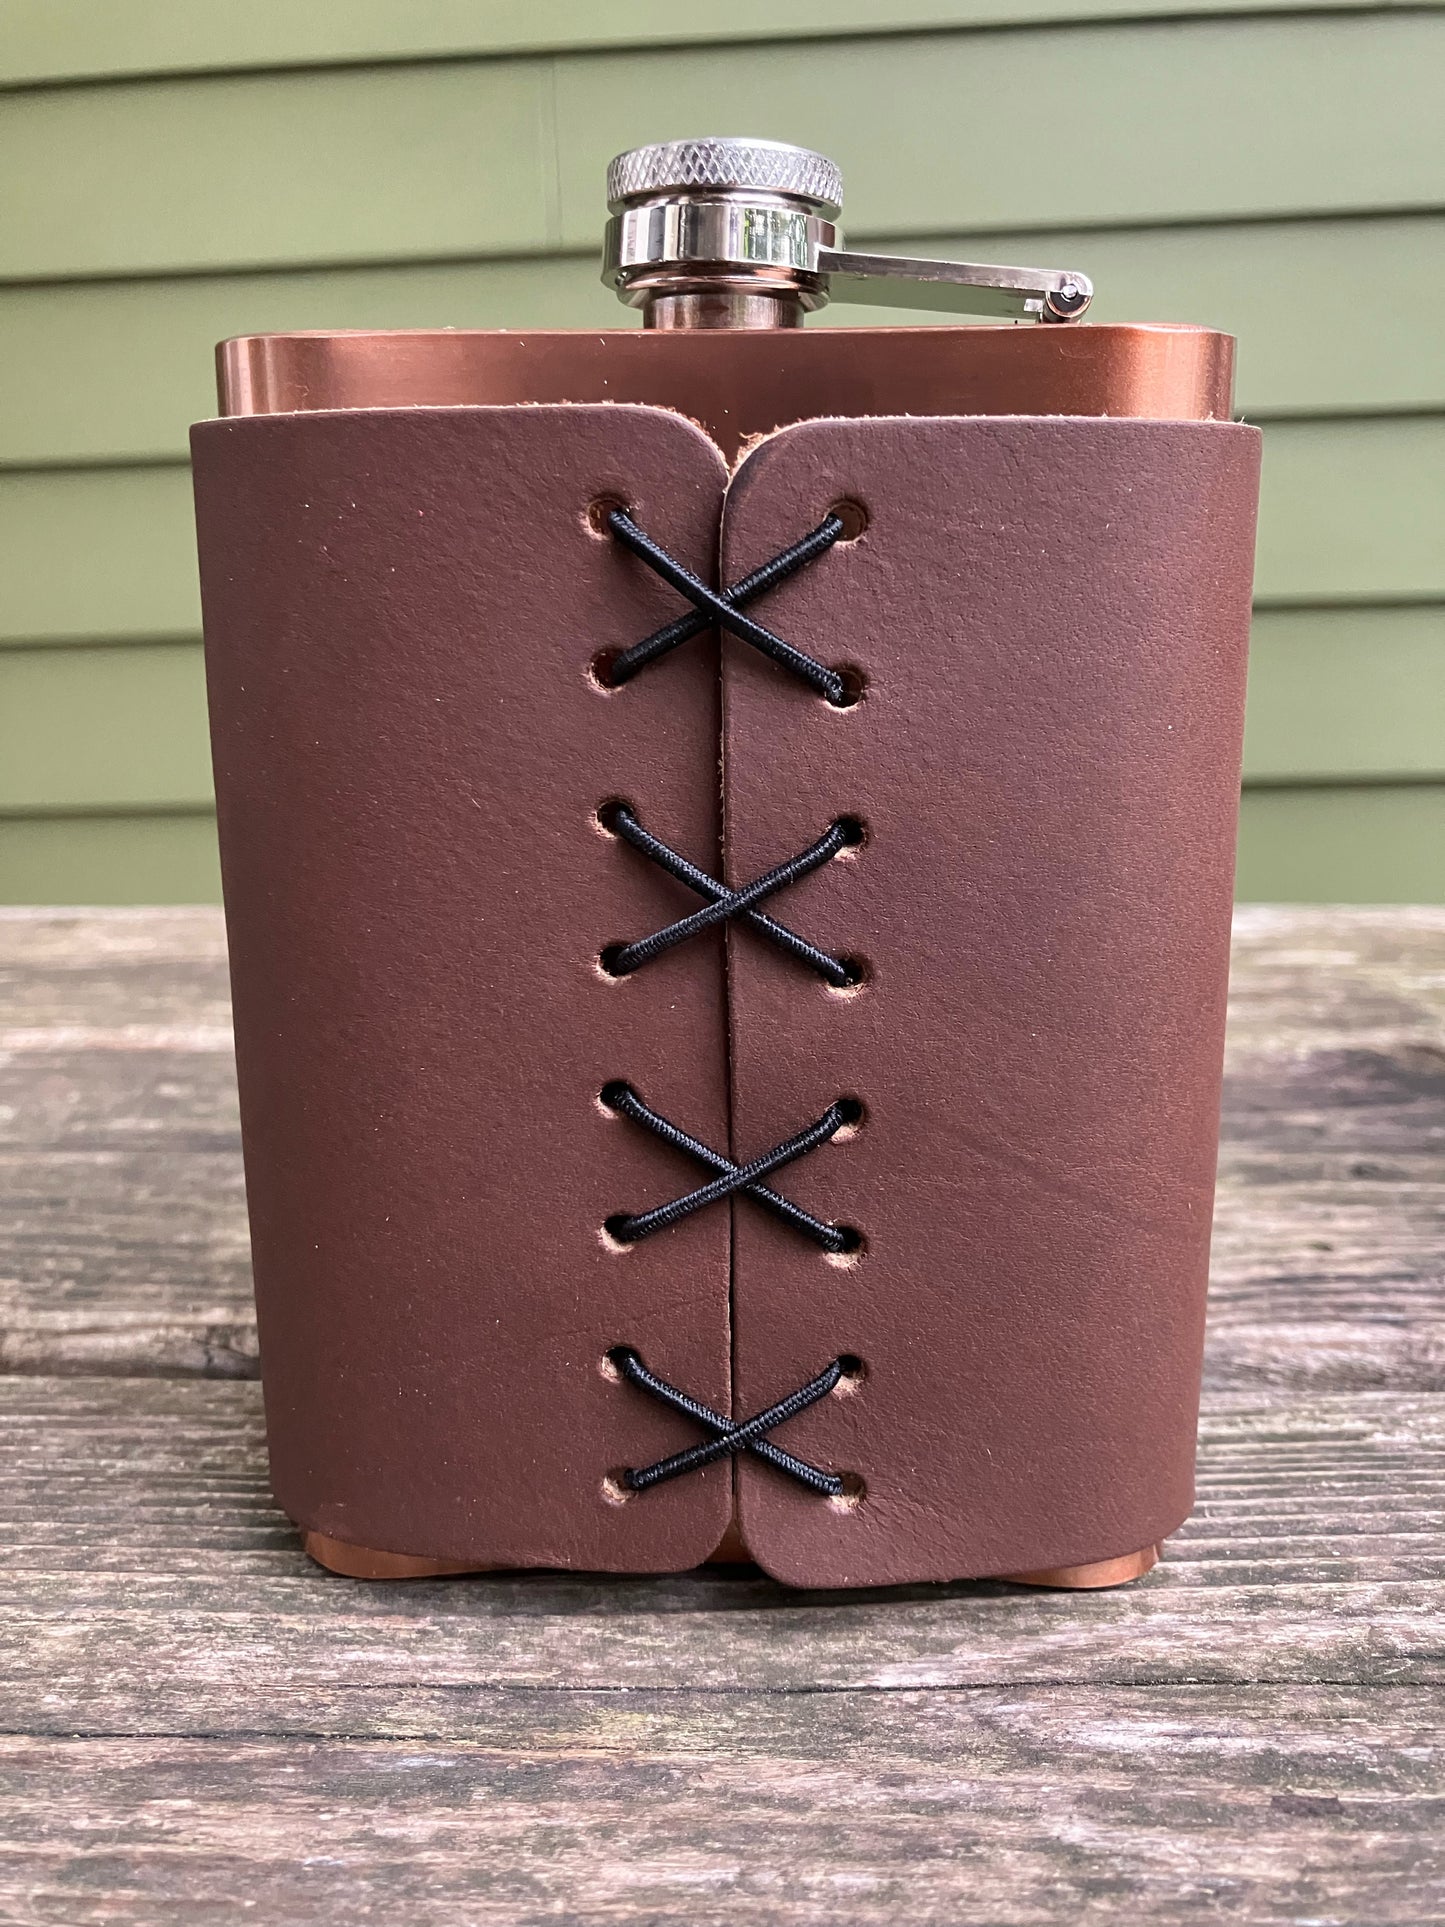 Leather Flask - Employee of the Month Runner-Up